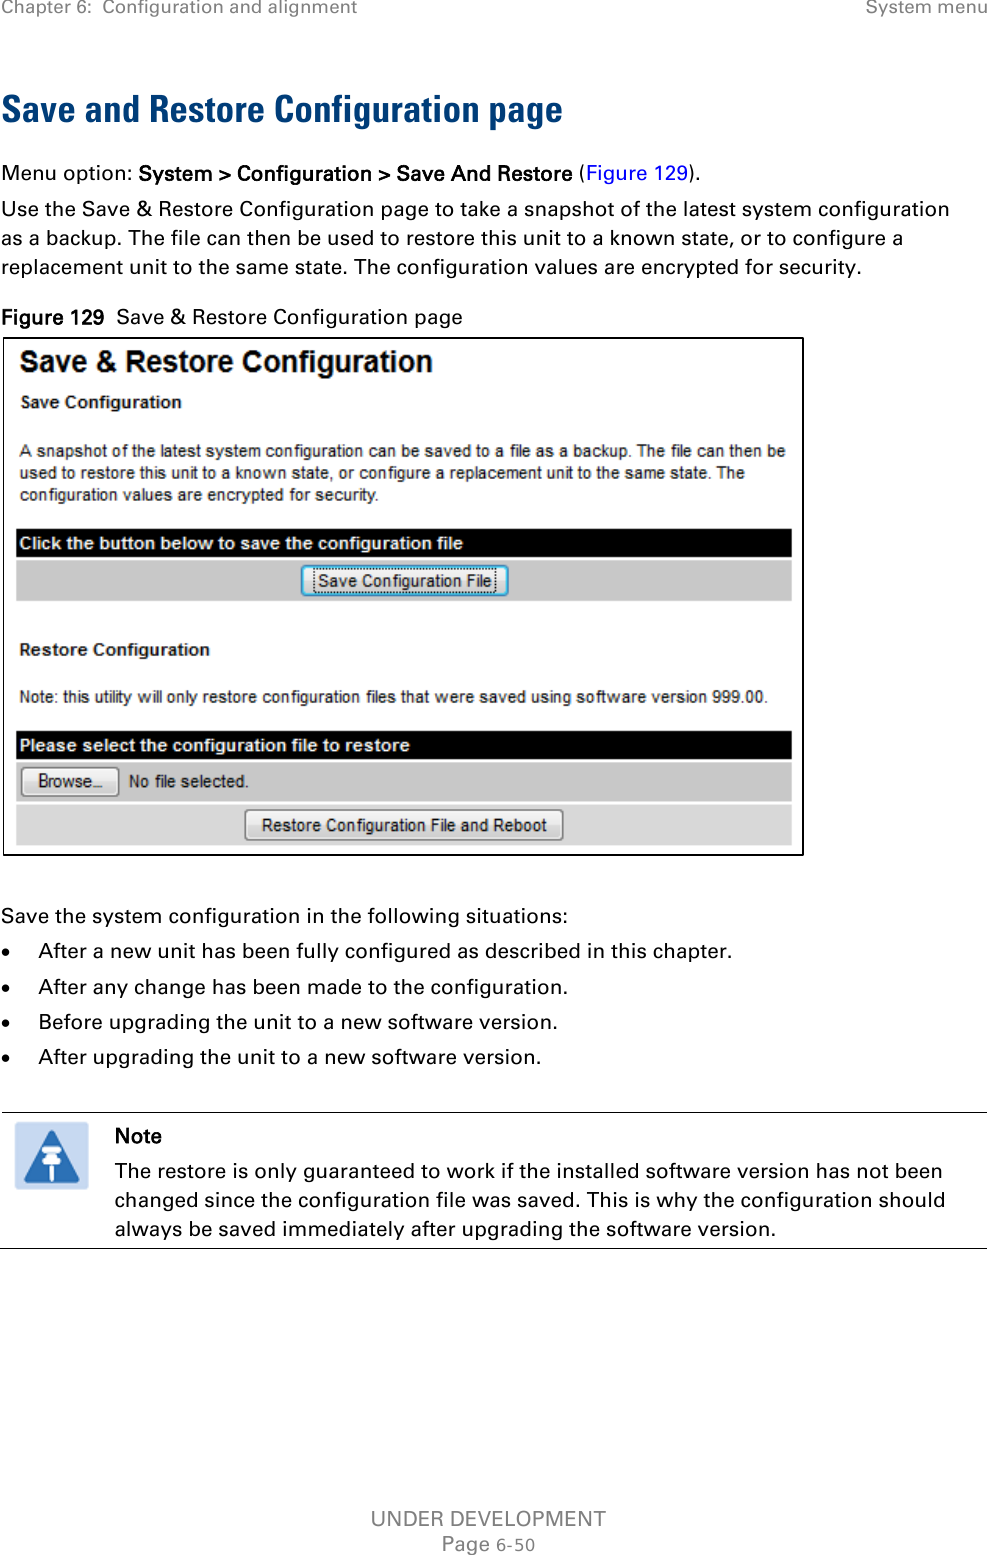 Chapter 6:  Configuration and alignment System menu  Save and Restore Configuration page Menu option: System &gt; Configuration &gt; Save And Restore (Figure 129). Use the Save &amp; Restore Configuration page to take a snapshot of the latest system configuration as a backup. The file can then be used to restore this unit to a known state, or to configure a replacement unit to the same state. The configuration values are encrypted for security. Figure 129  Save &amp; Restore Configuration page   Save the system configuration in the following situations: • After a new unit has been fully configured as described in this chapter. • After any change has been made to the configuration. • Before upgrading the unit to a new software version. • After upgrading the unit to a new software version.   Note The restore is only guaranteed to work if the installed software version has not been changed since the configuration file was saved. This is why the configuration should always be saved immediately after upgrading the software version.  UNDER DEVELOPMENT Page 6-50 